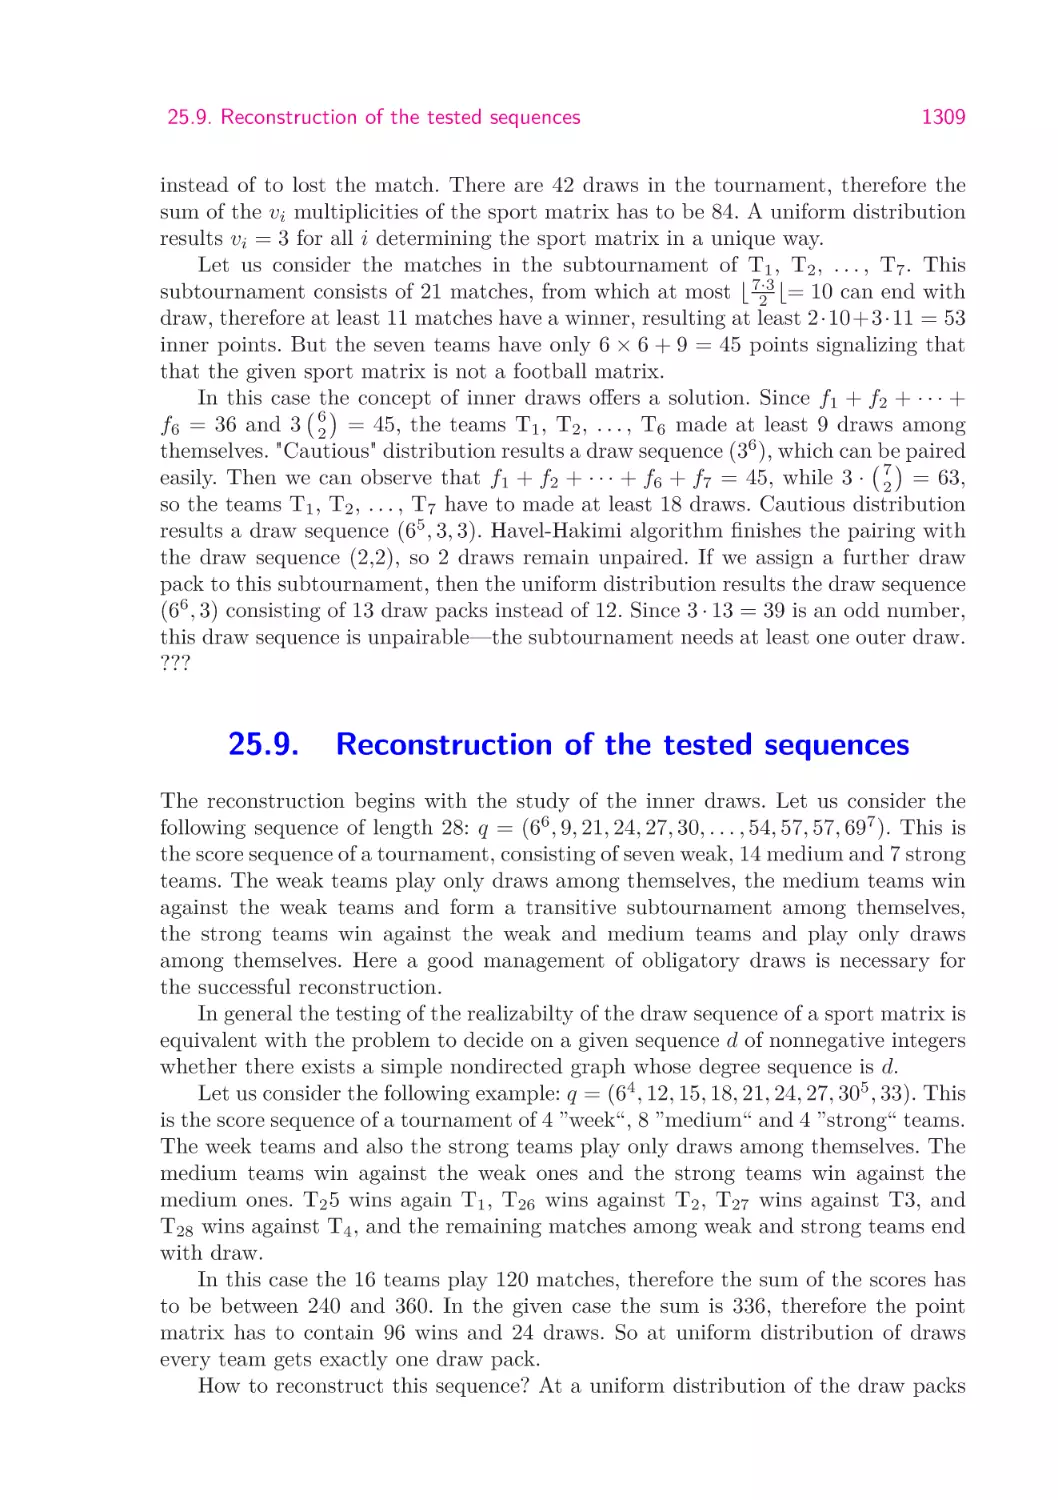 25.9.   Reconstruction of the tested sequences